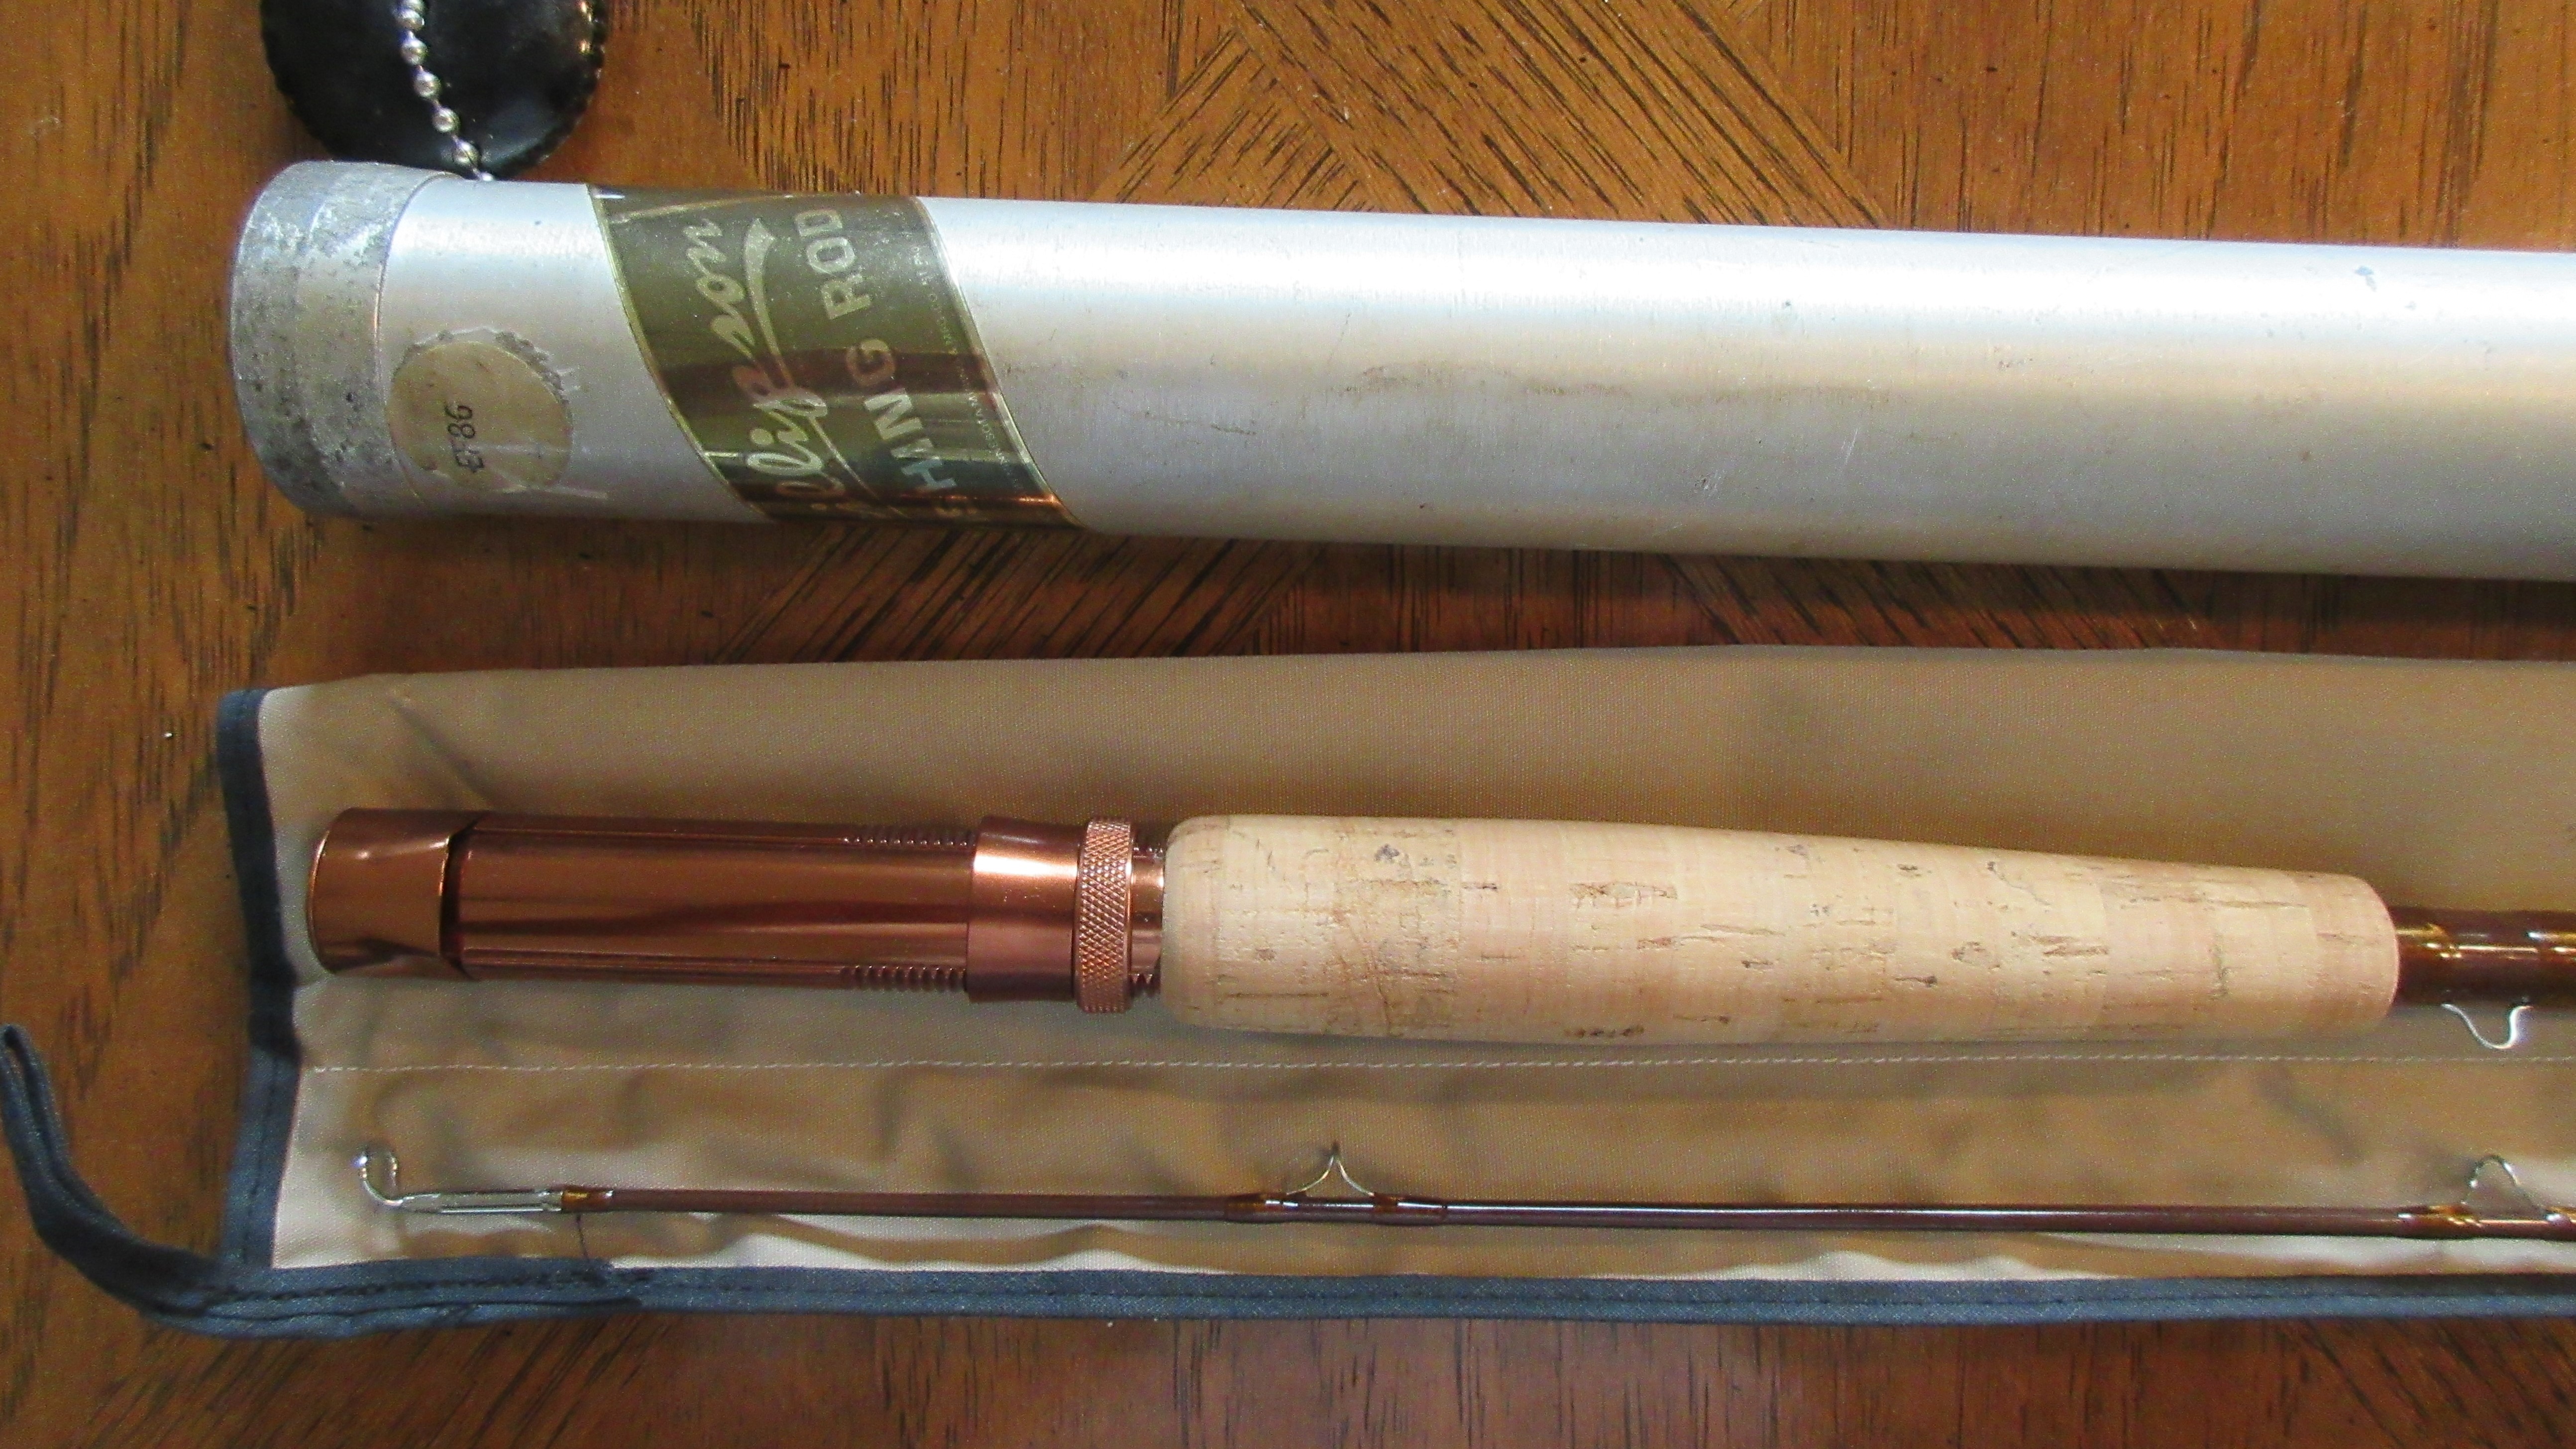 Beans LL 6 1/2' Featherweight, Collecting Fiberglass Fly Rods